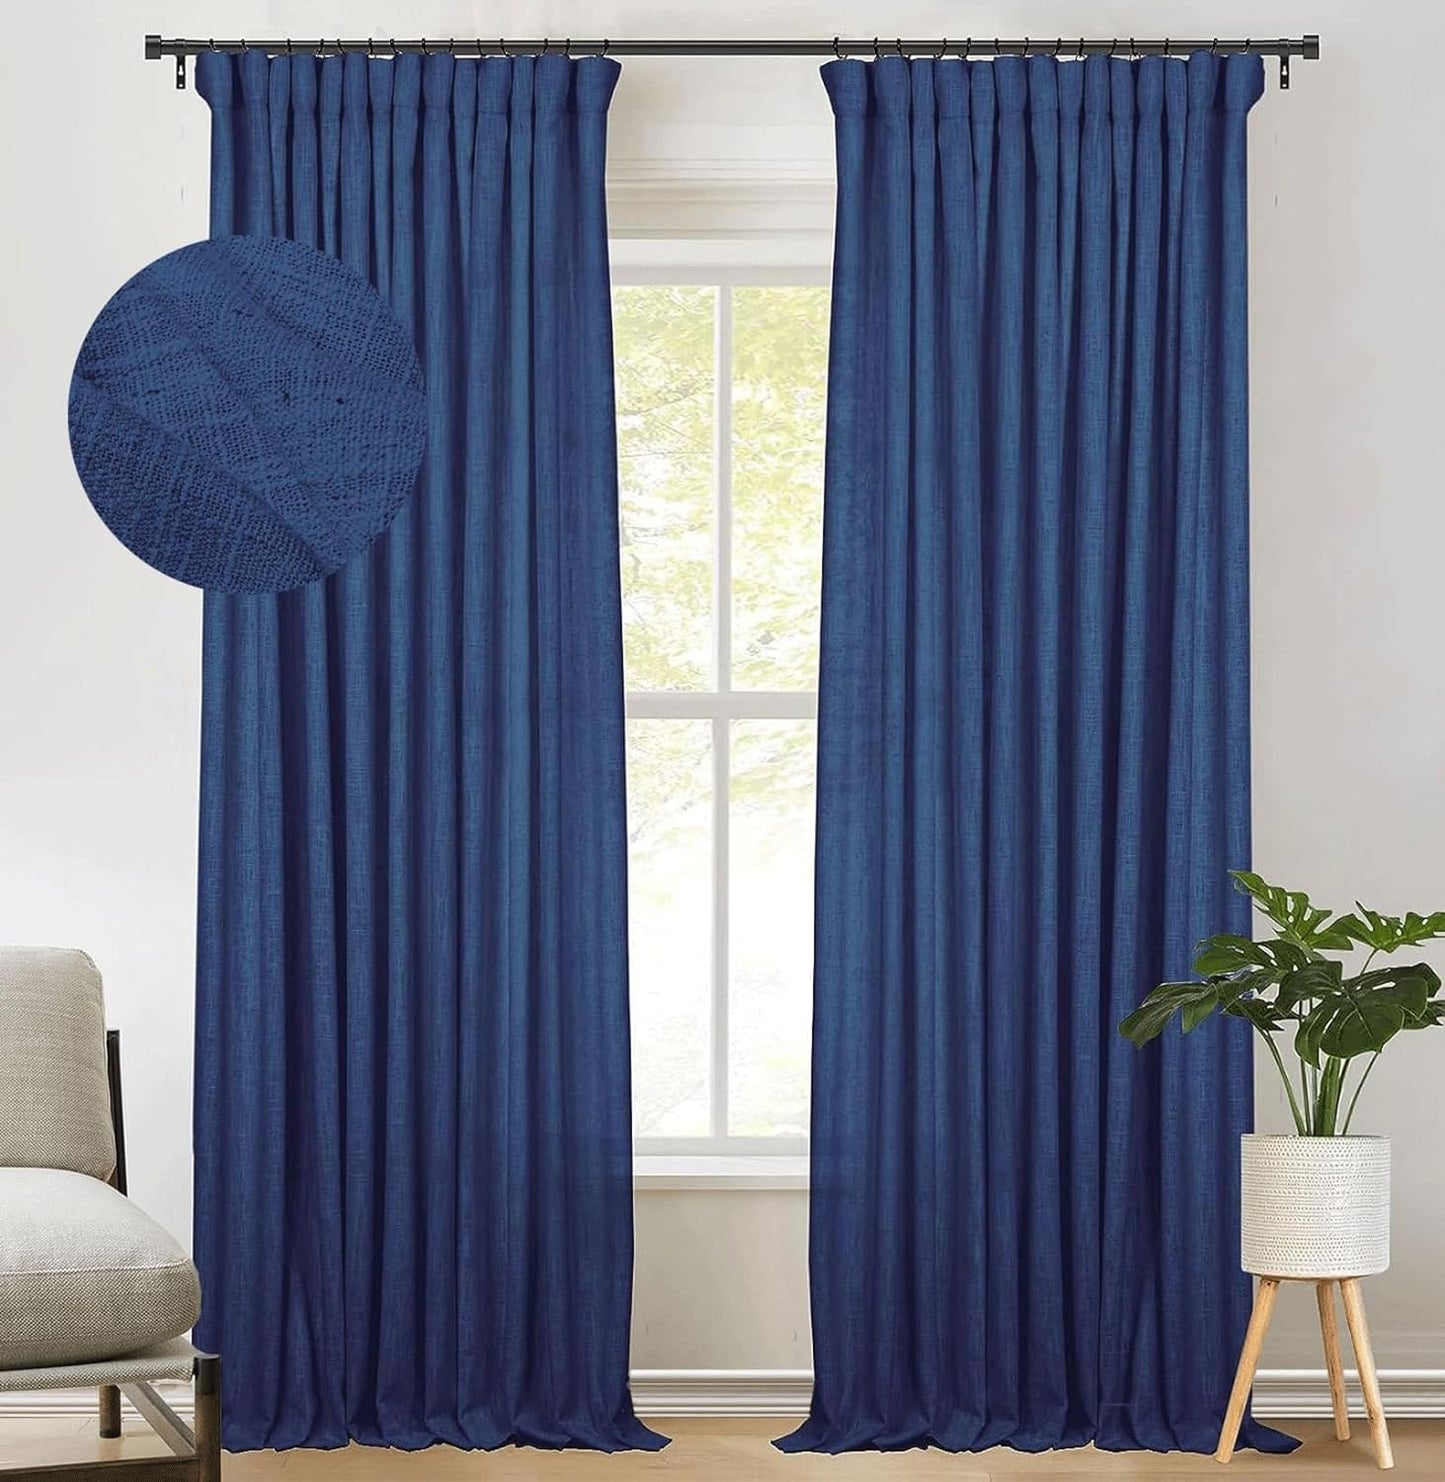 Zeerobee Beige White Linen Curtains for Living Room/Bedroom Linen Curtains 96 Inches Long 2 Panels Linen Drapes Farmhouse Pinch Pleated Curtains Light Filtering Privacy Curtains, W50 X L96  zeerobee 09 Navy 50"W X 90"L 